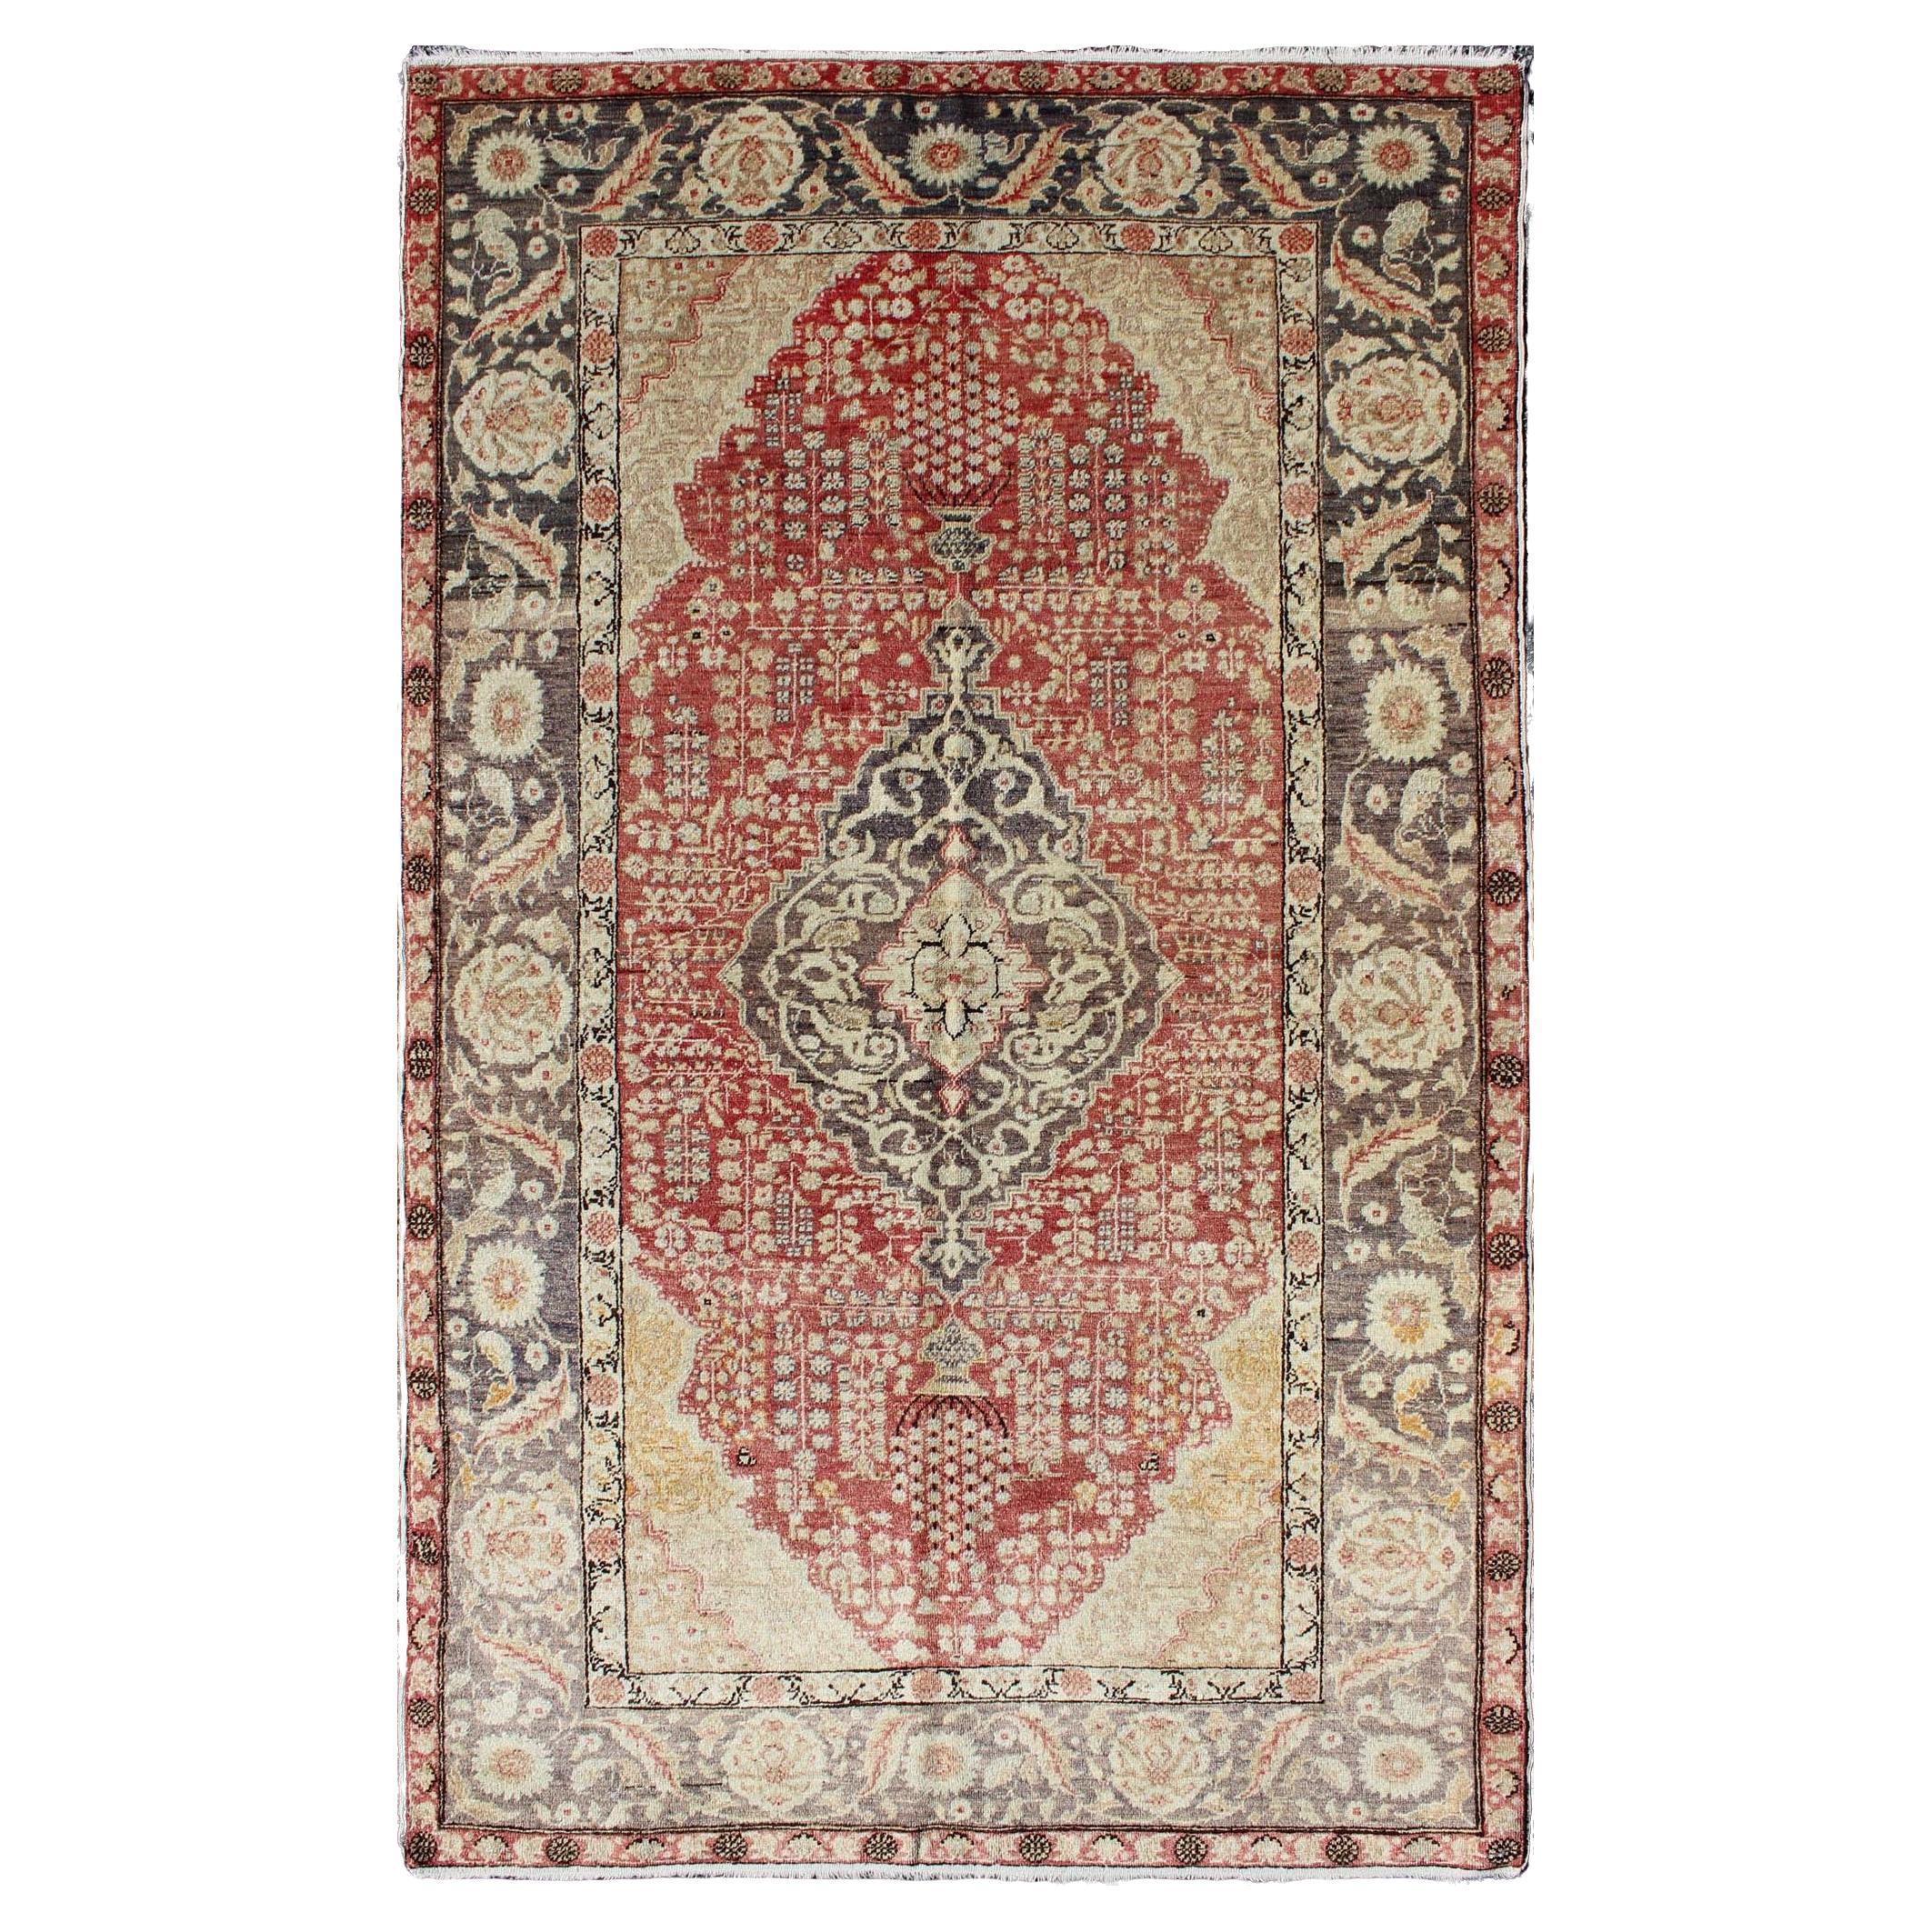 Antique Turkish Oushak Rug with Floral Medallion Design in Red and Charcoal